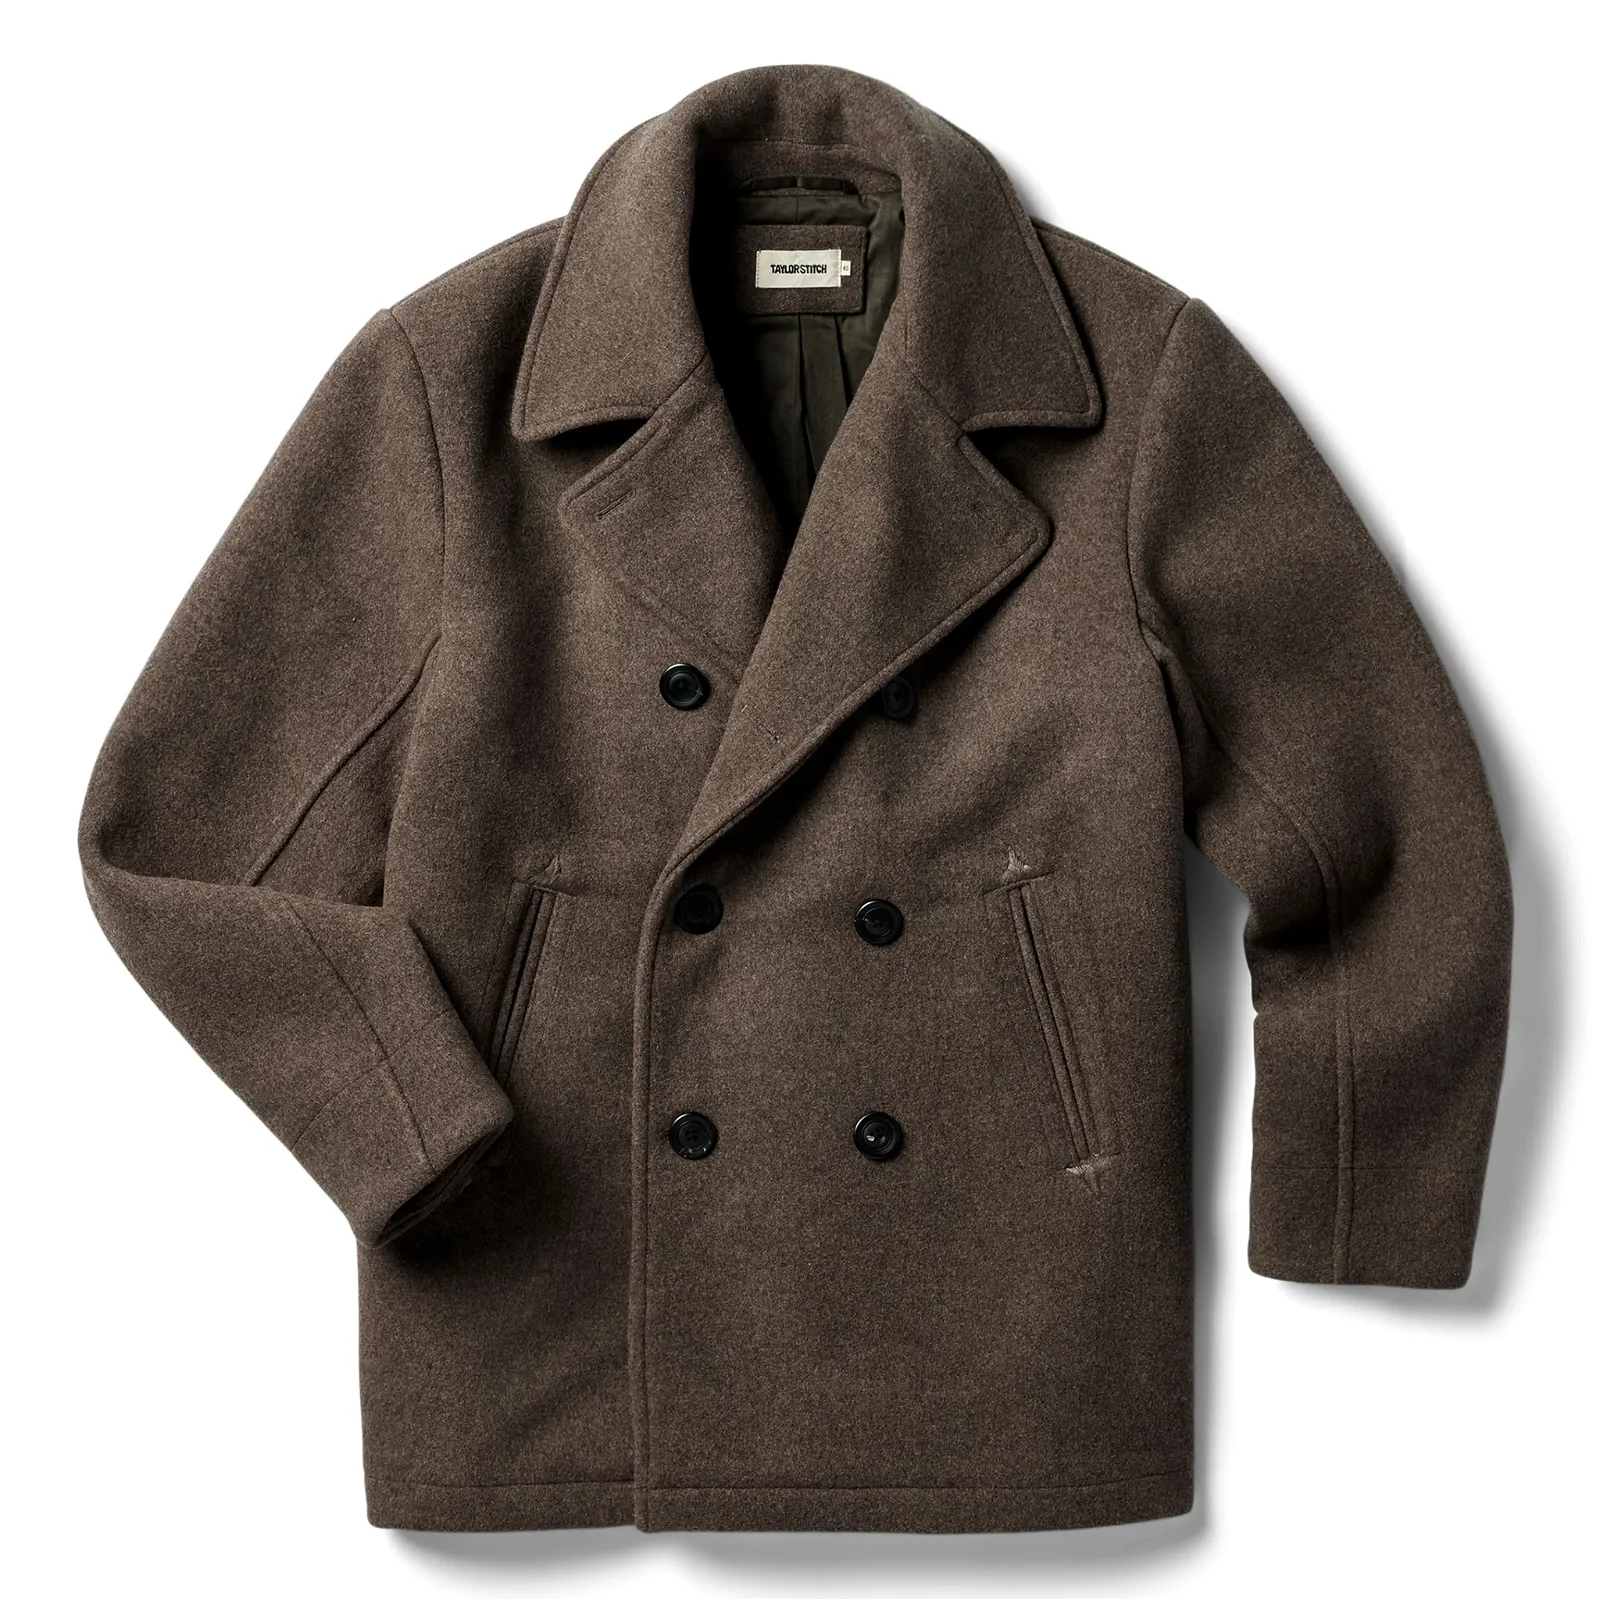 Image of The Mariner Coat in Sable Melton Wool